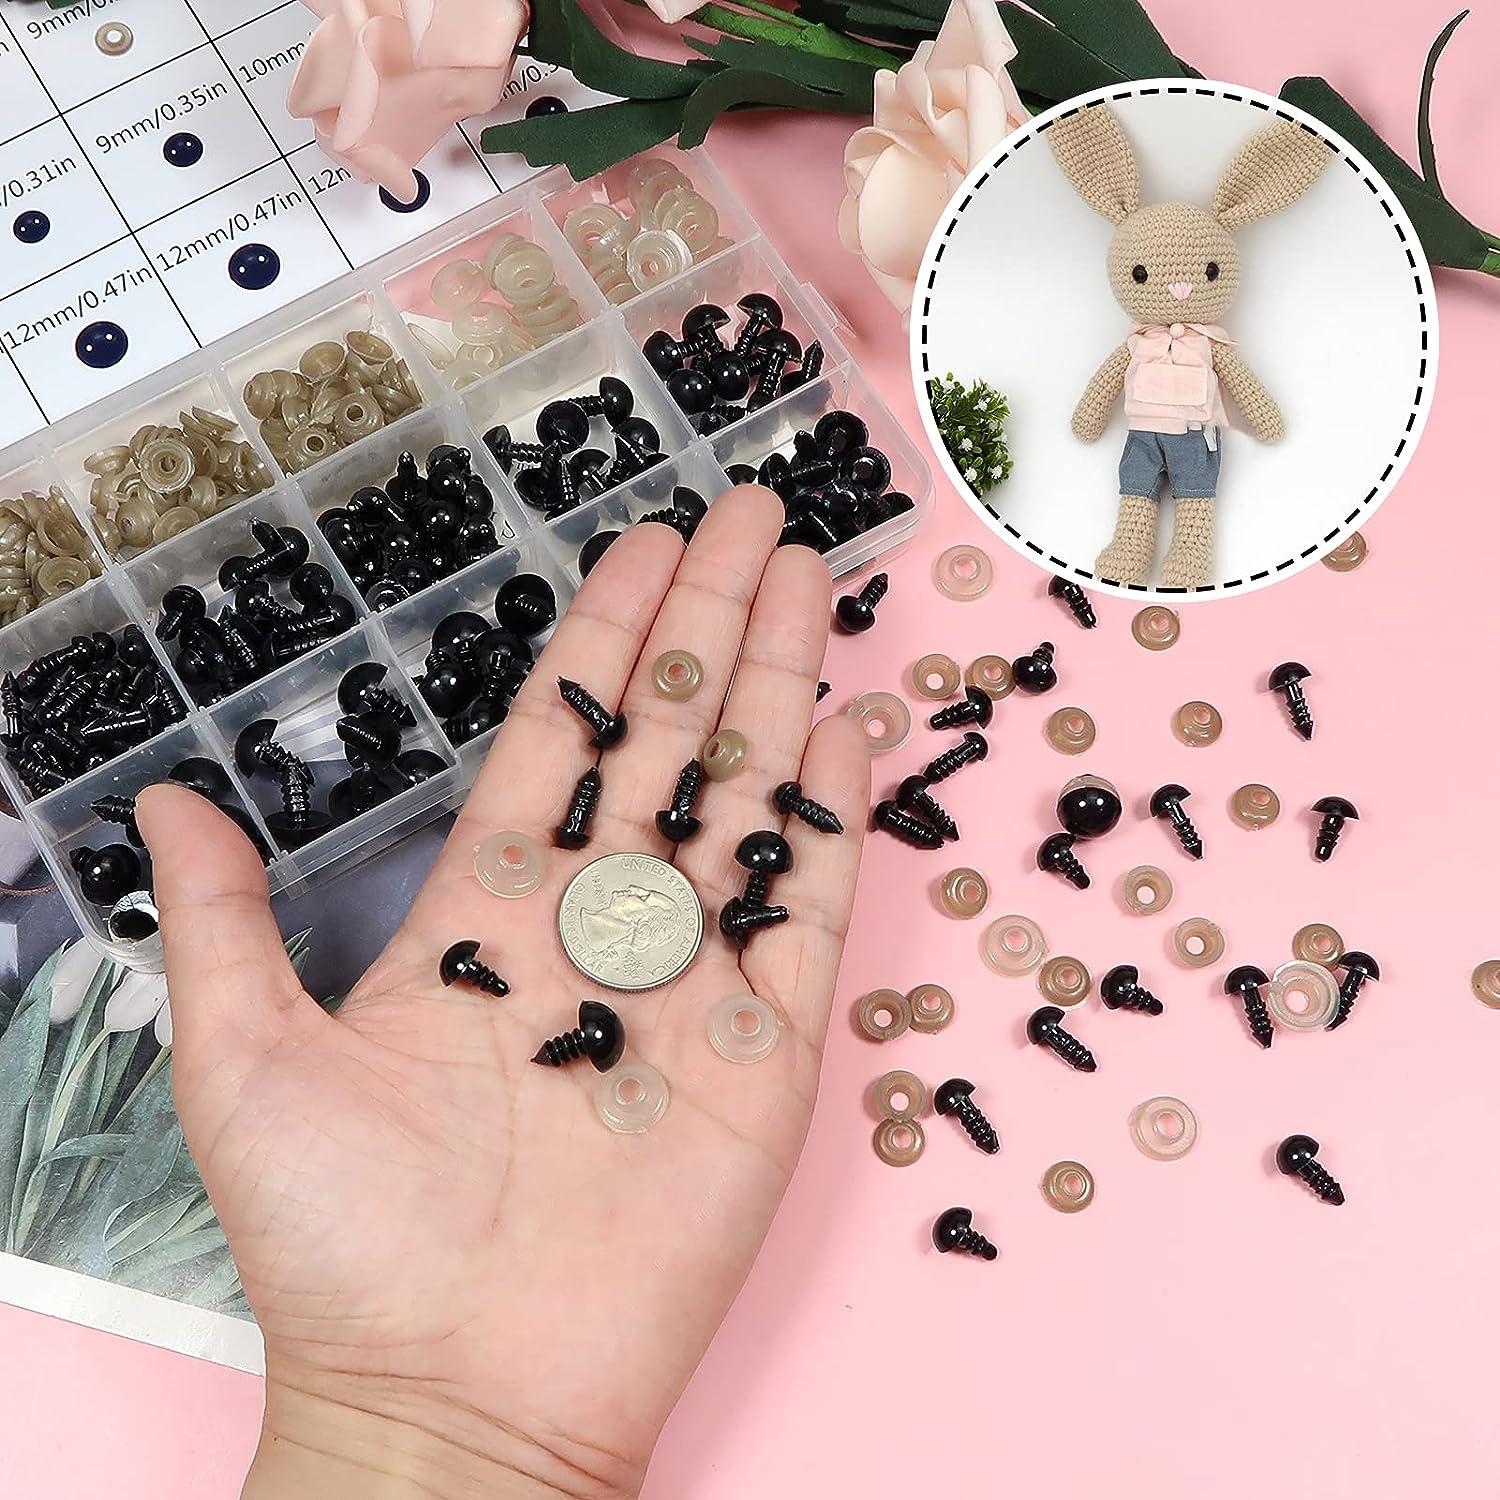 TOAOB 150pcs Black Plastic Safety Eyes with Washers 6mm 8mm 9mm 10mm 12mm Craft Doll Eyes for Amigurumis Crochet and Stuffed Animals Bears Making